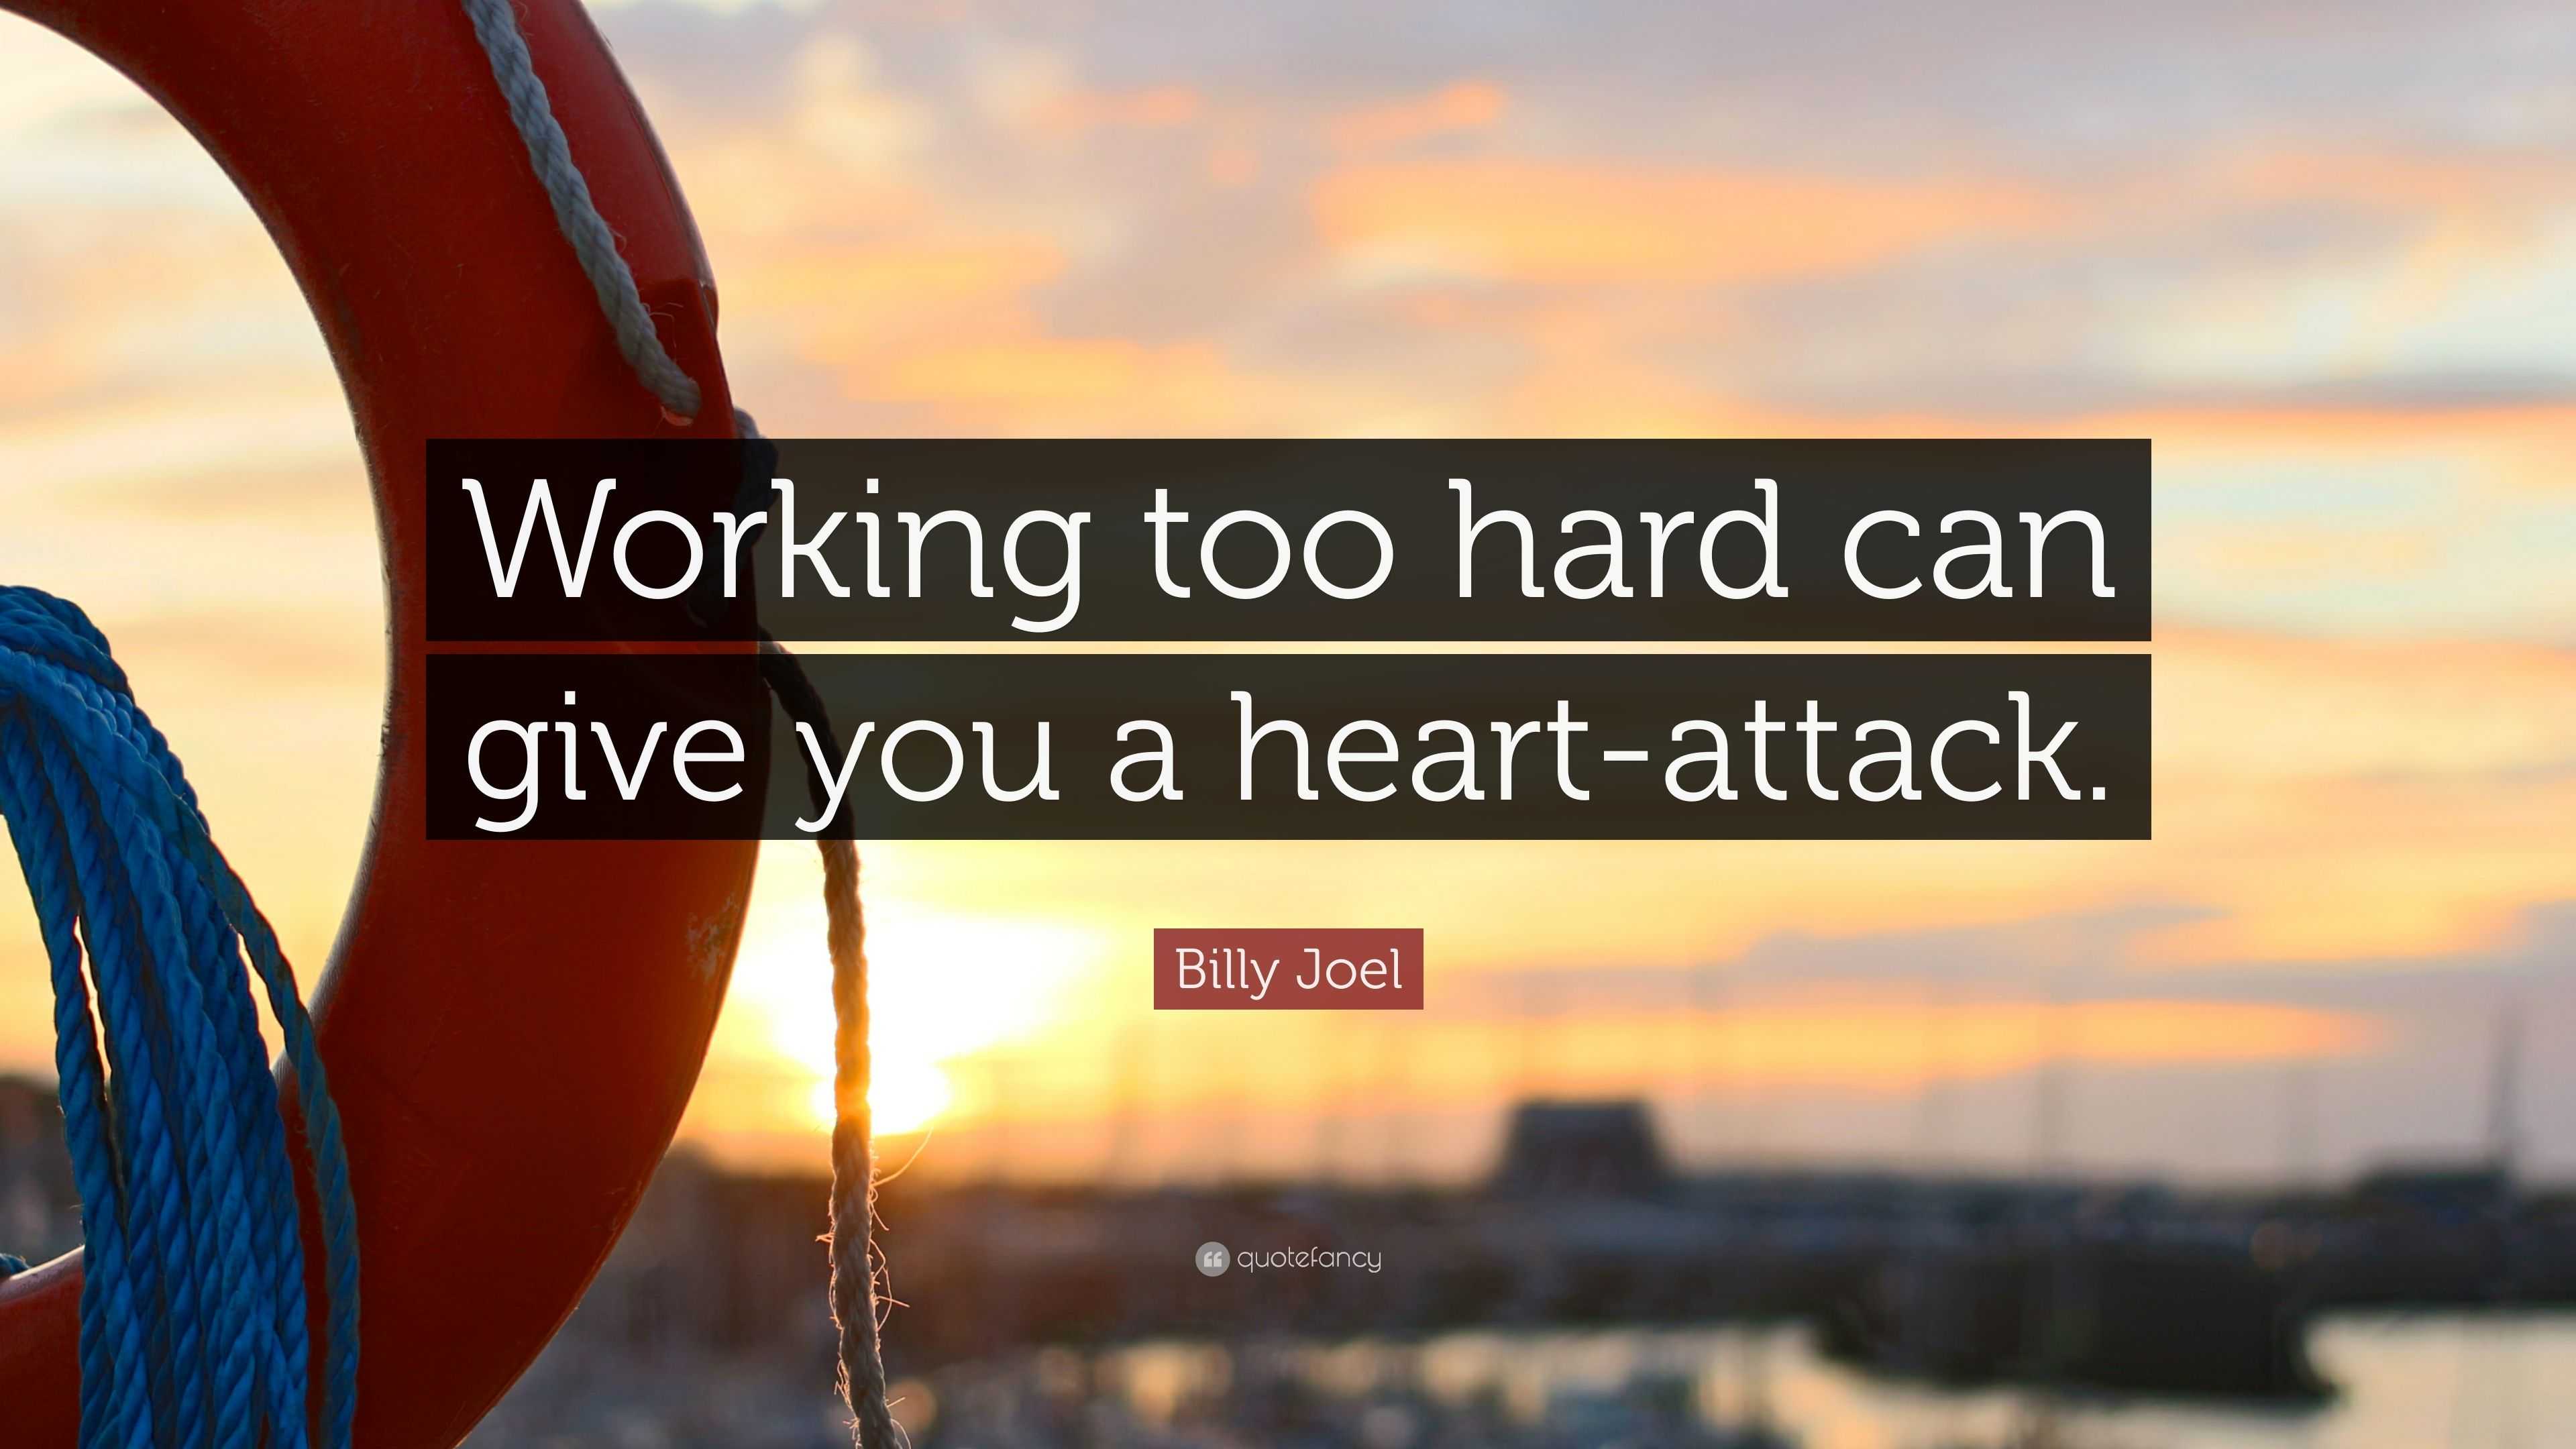 Billy Joel Quote “Working too hard can give you a heart